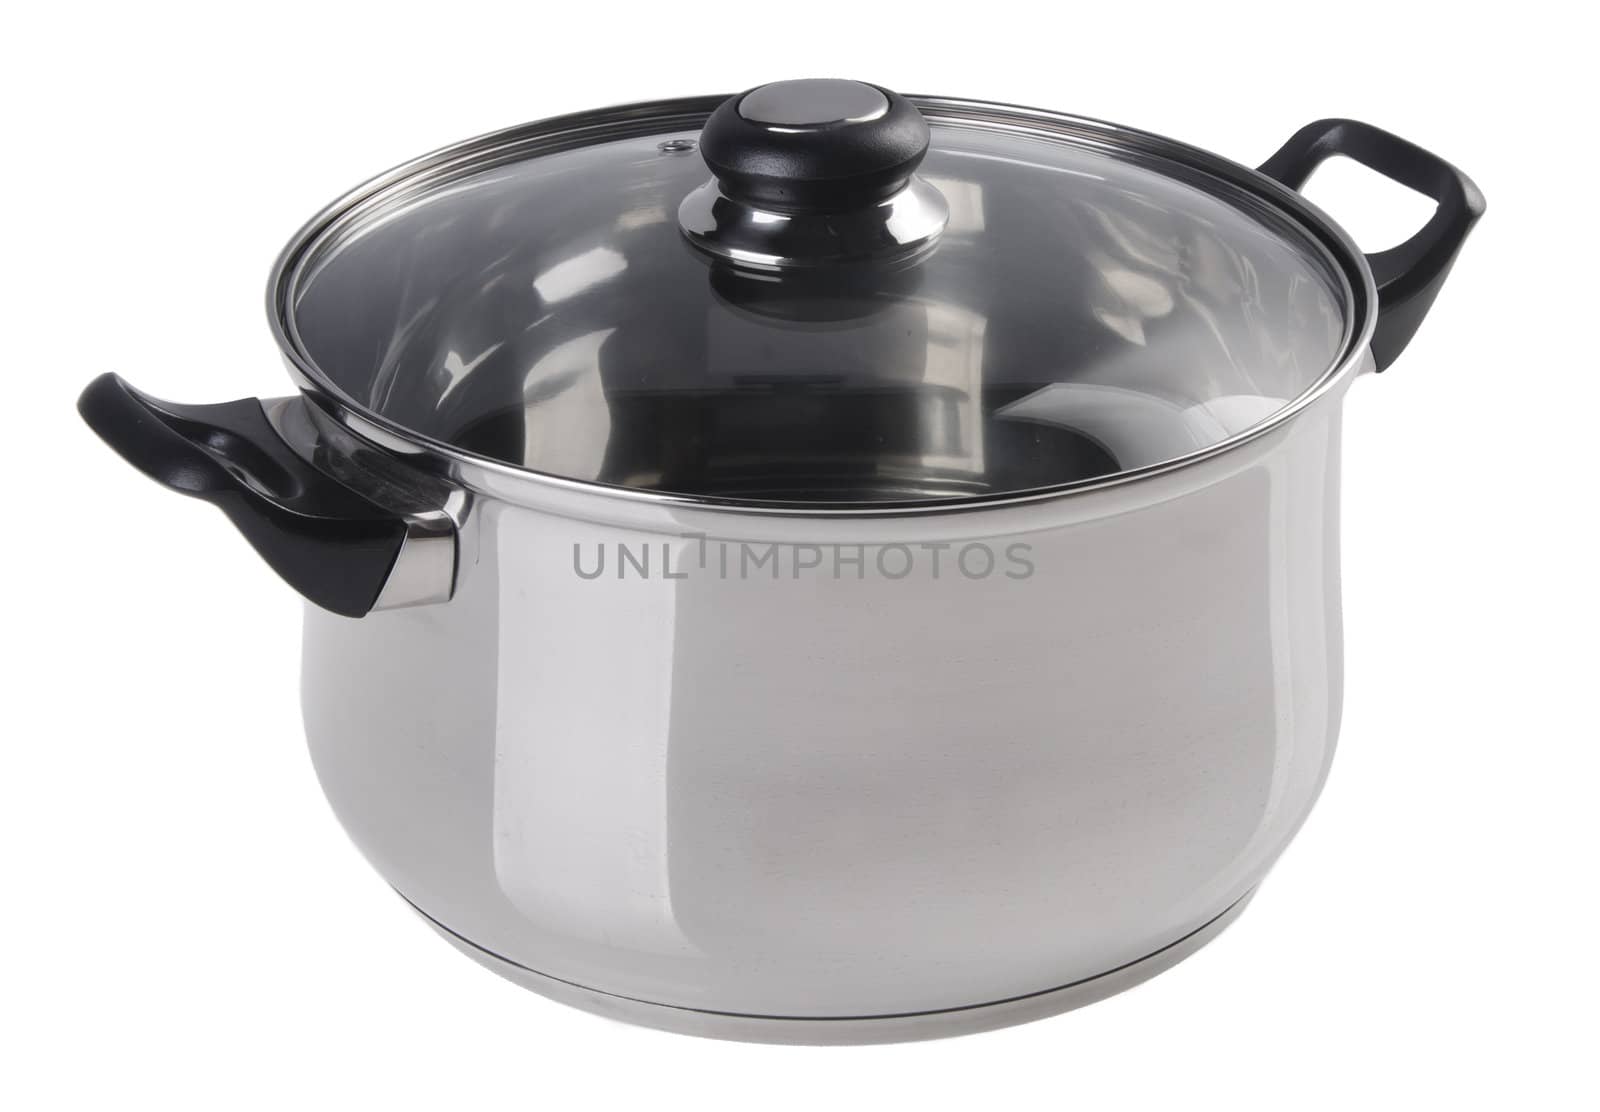 pot, Stainless steel pot on white background by heinteh